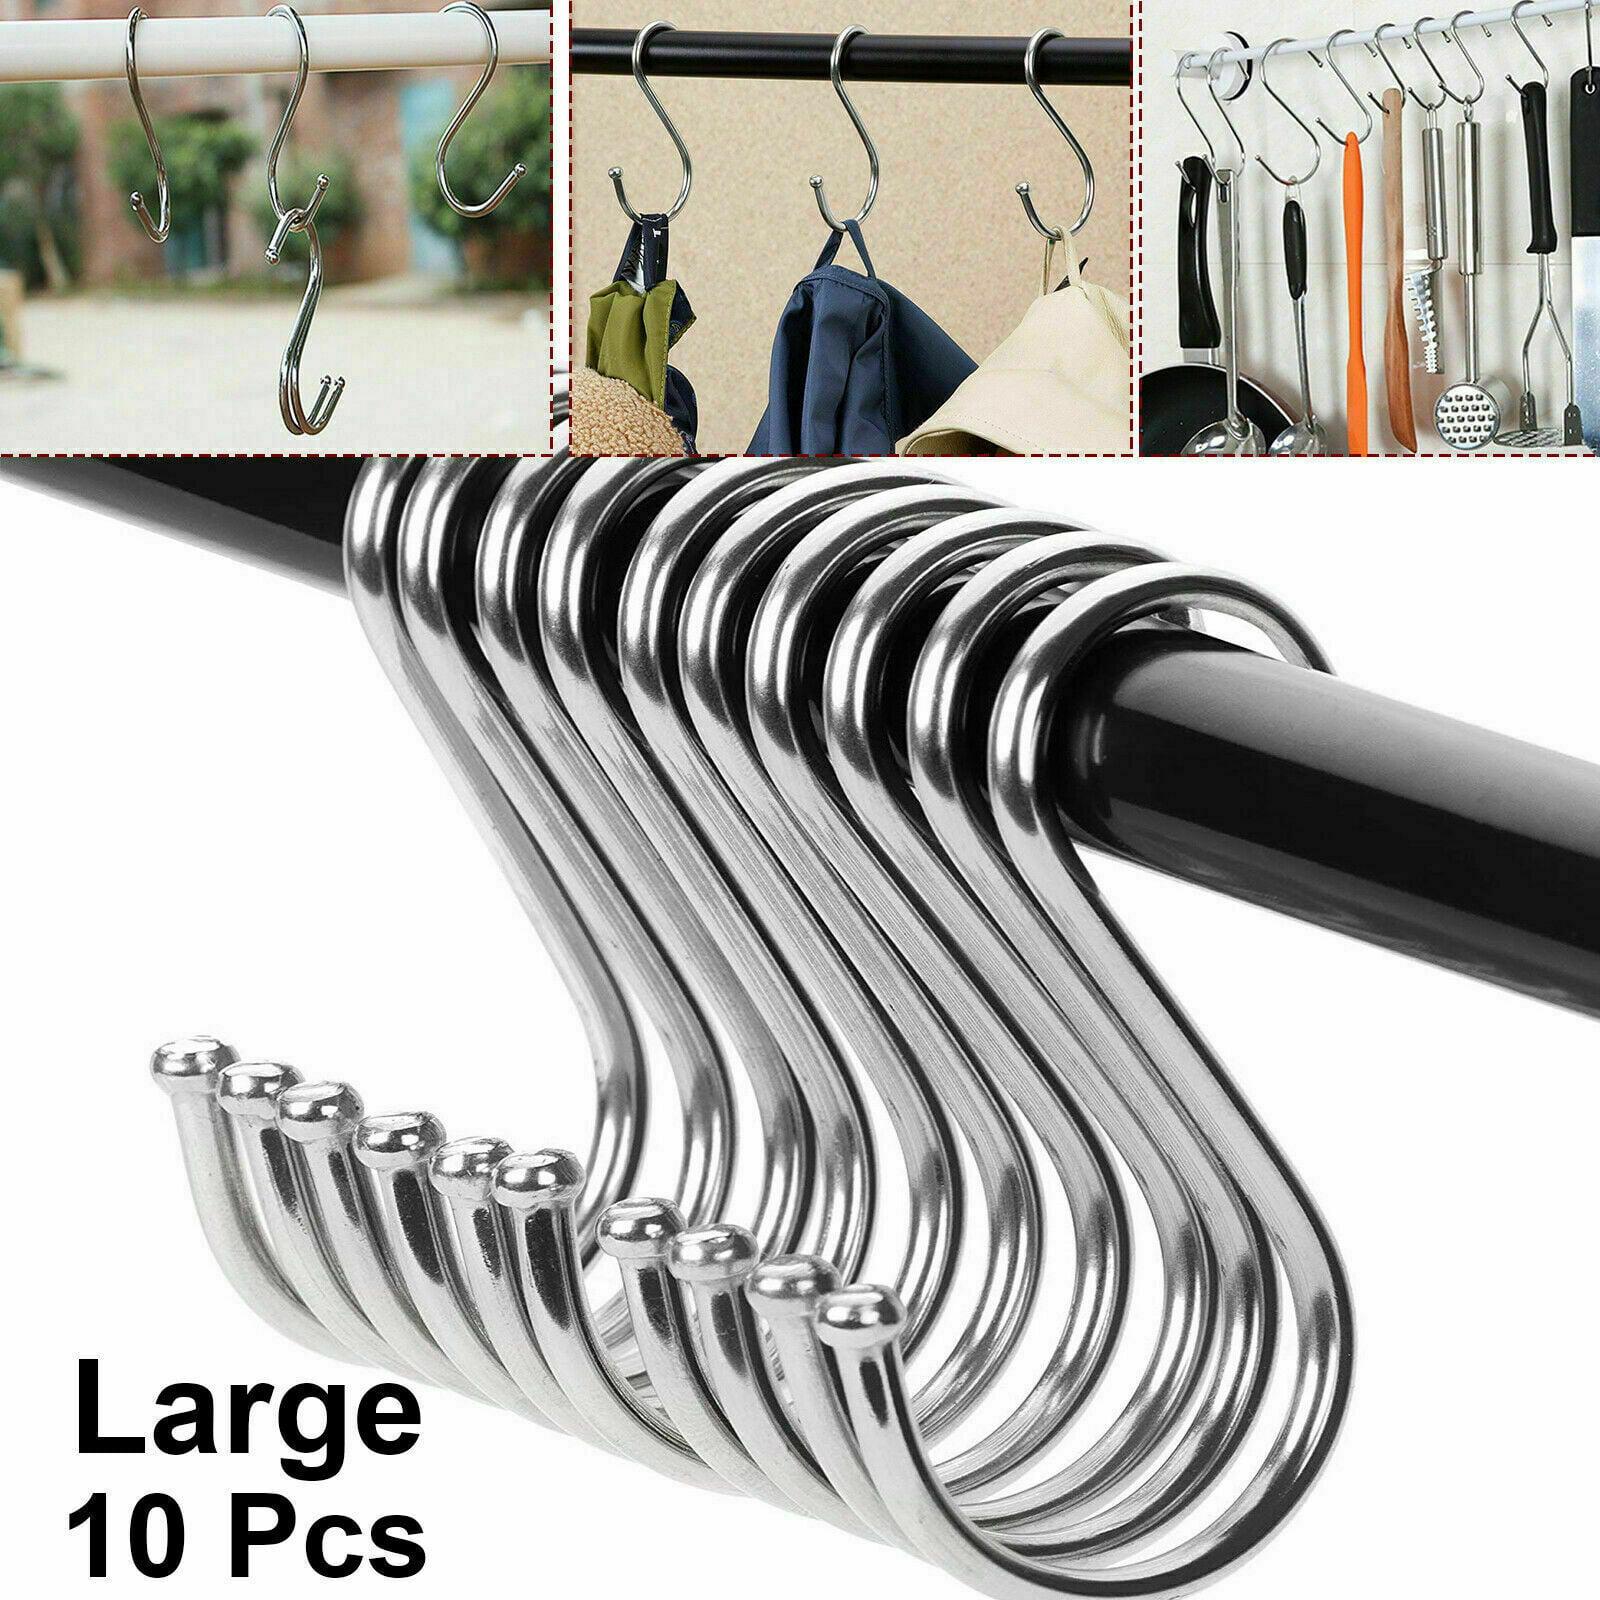 10Pc Stainless Steel S Hooks Kitchen Meat Pot Pan Utensil Clothes Hanger Hanging